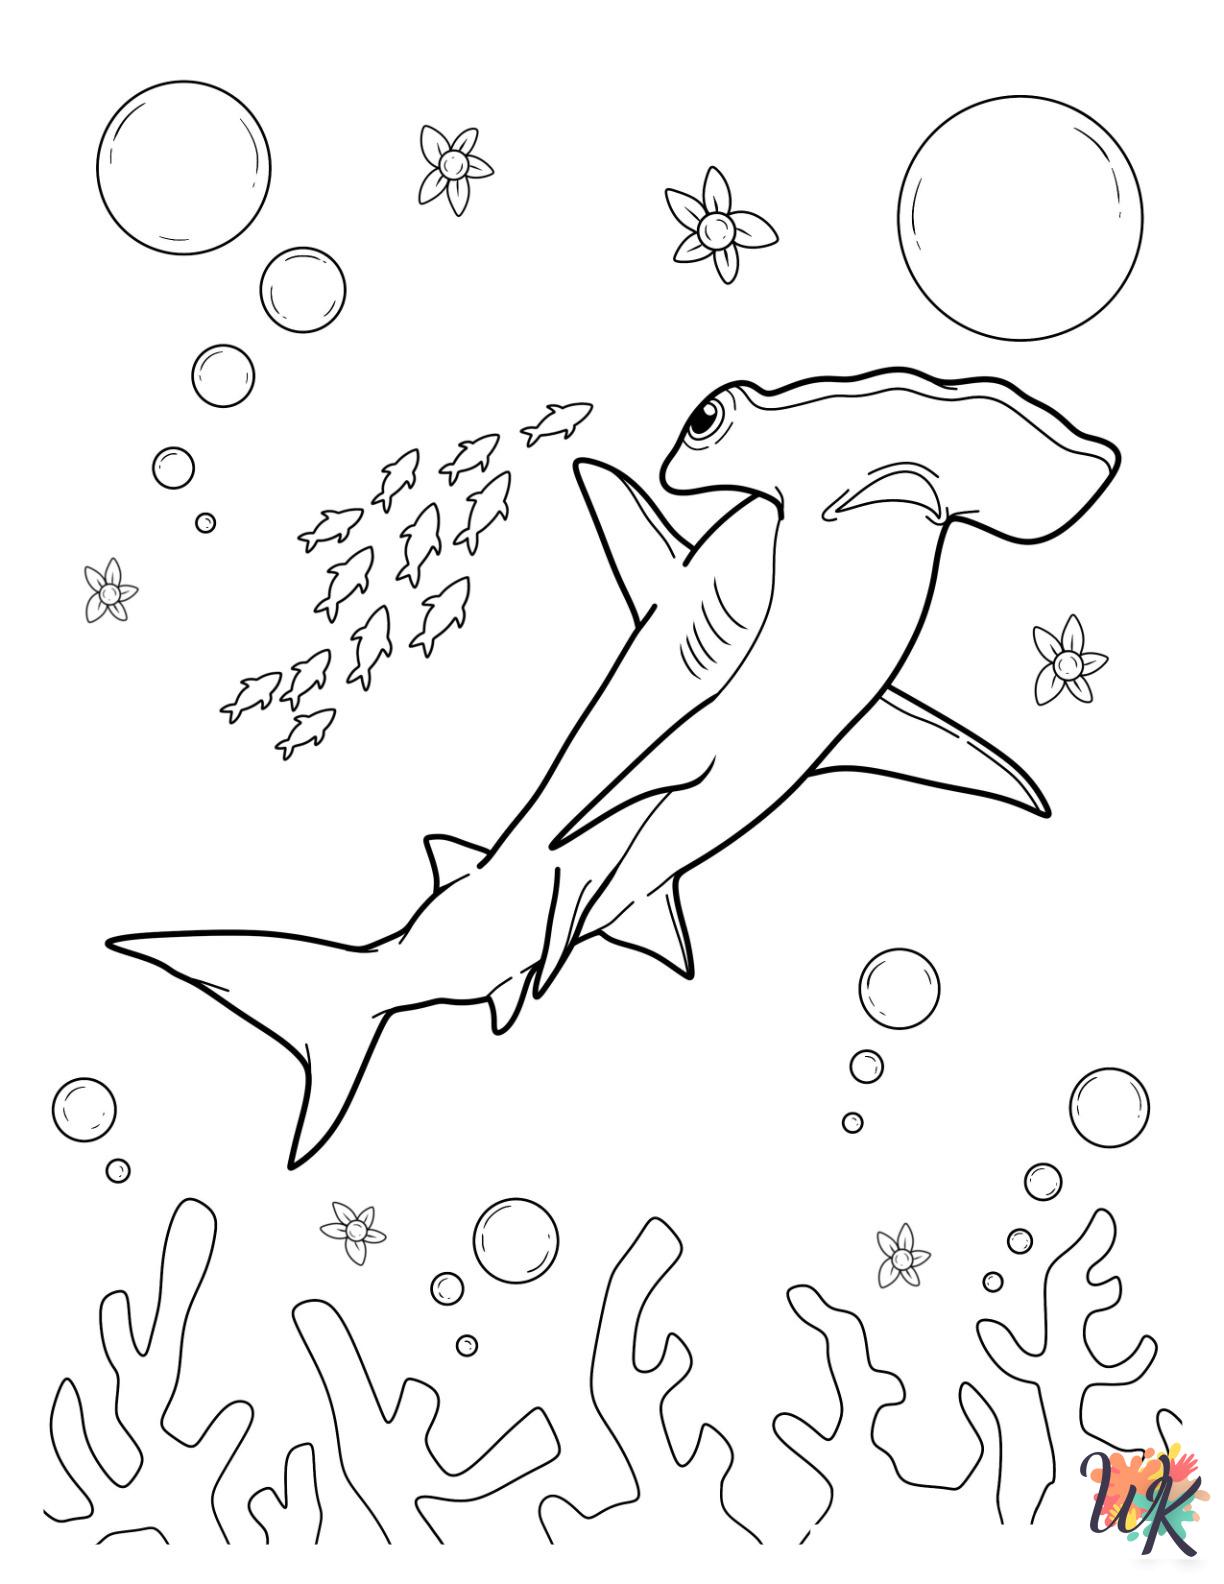 Hammerhead Shark coloring pages to print